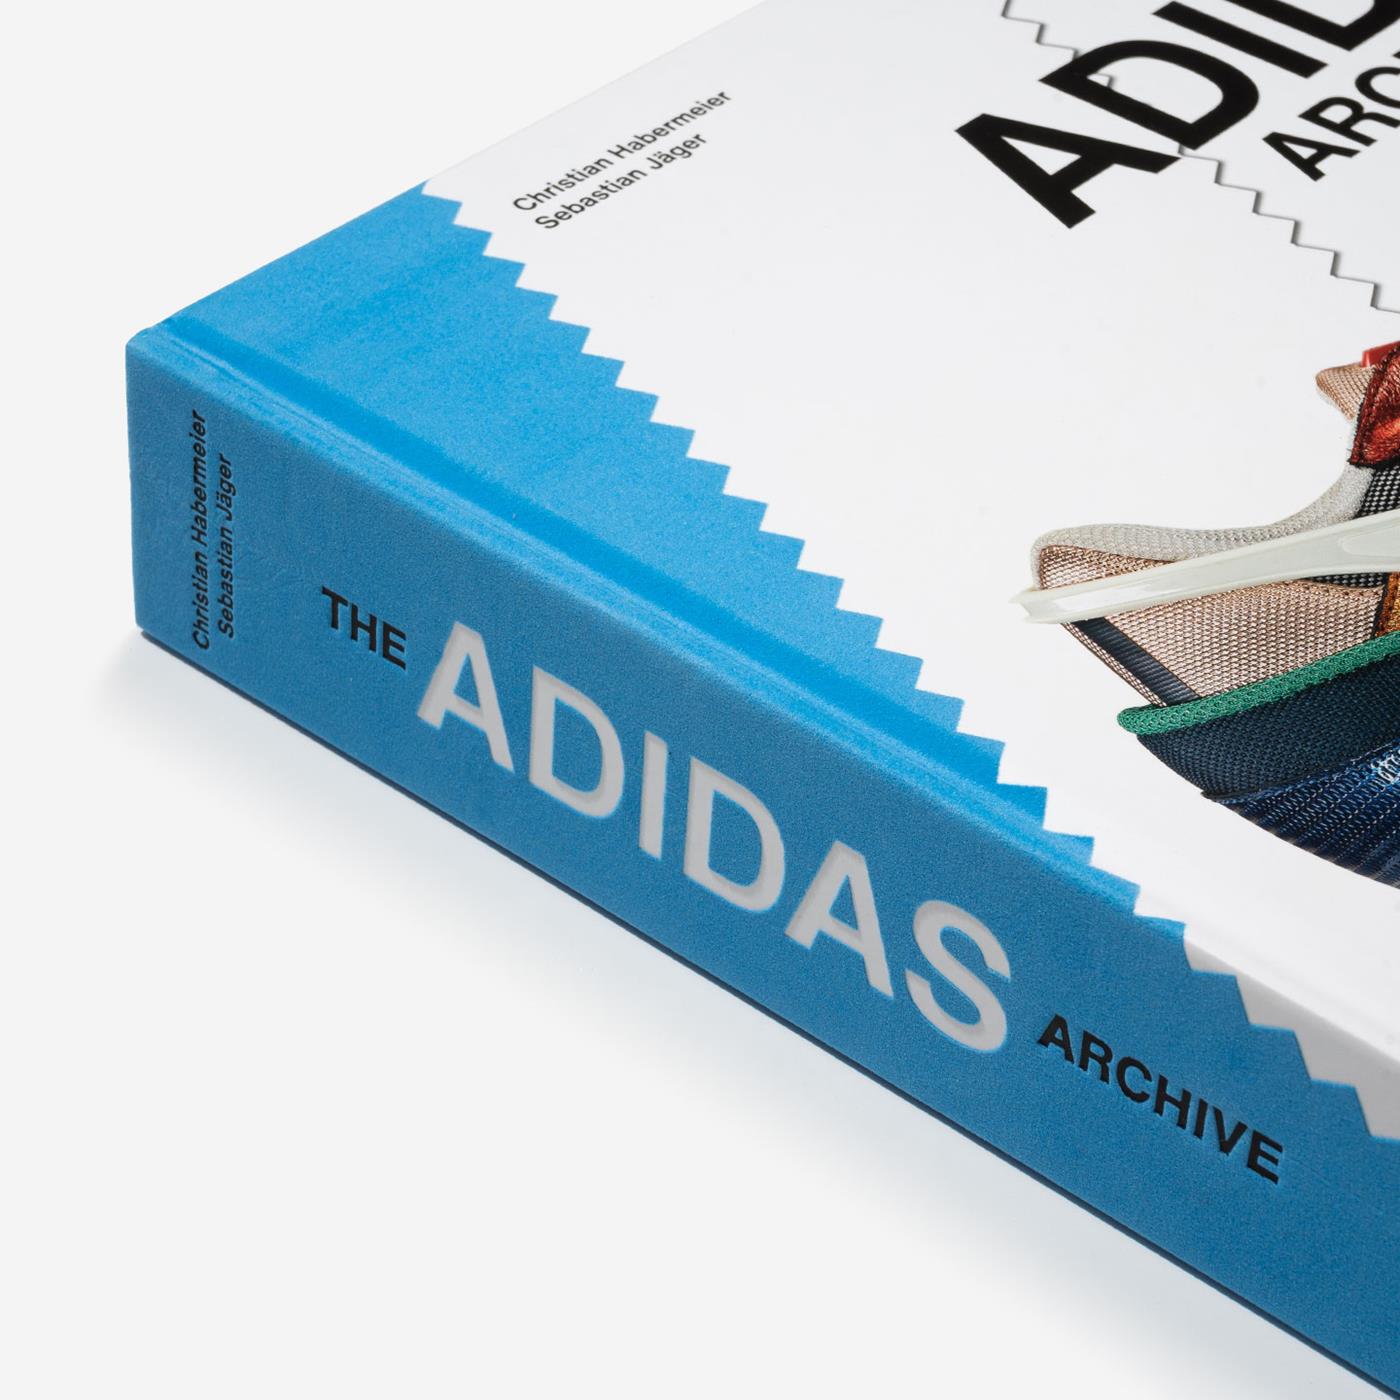 The Adidas Archive The Footwear Collection